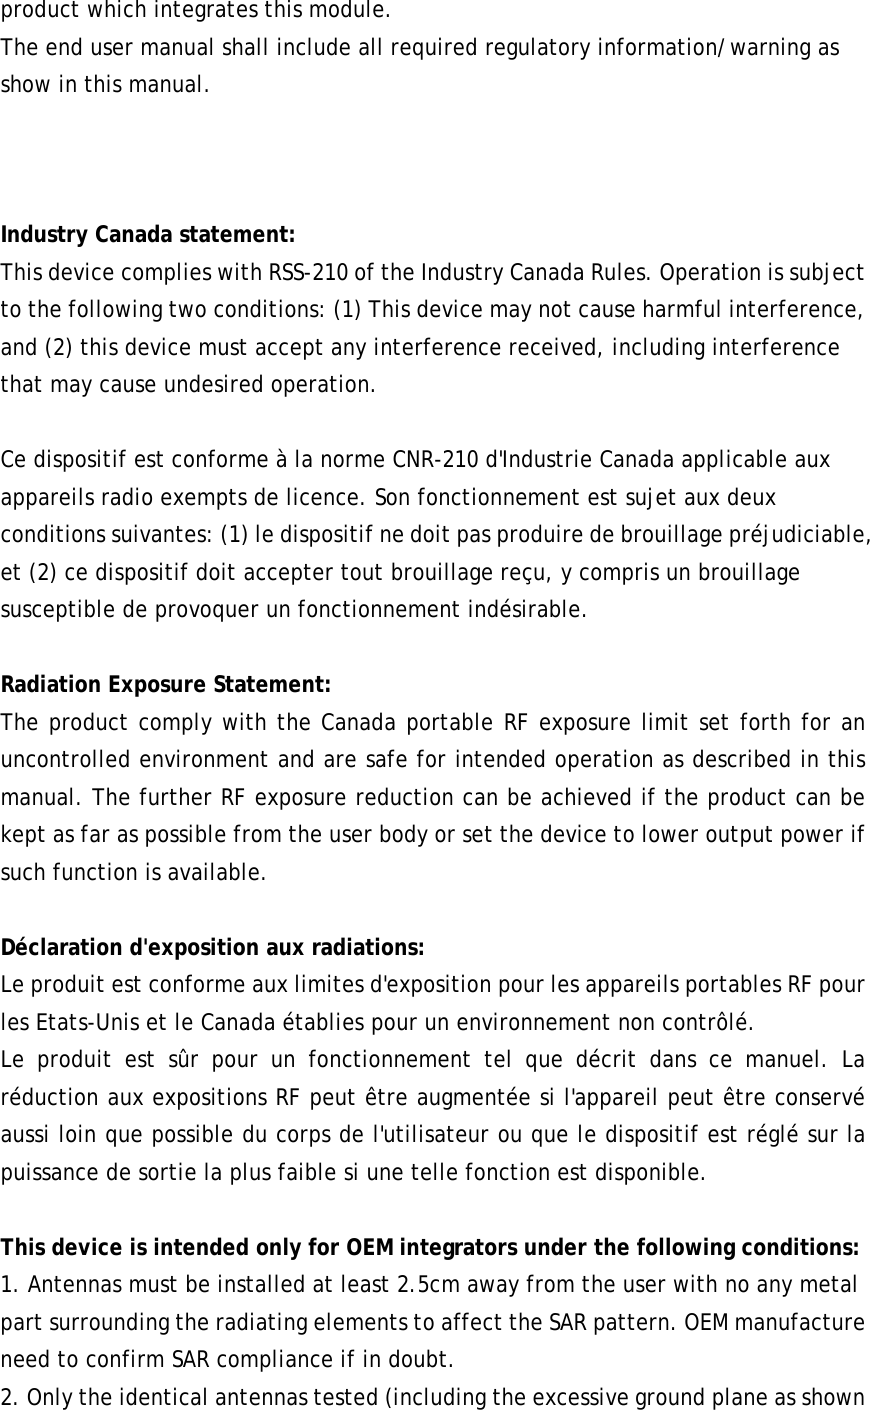 product which integrates this module. The end user manual shall include all required regulatory information/warning as show in this manual.    Industry Canada statement: This device complies with RSS-210 of the Industry Canada Rules. Operation is subject to the following two conditions: (1) This device may not cause harmful interference, and (2) this device must accept any interference received, including interference that may cause undesired operation.  Ce dispositif est conforme à la norme CNR-210 d&apos;Industrie Canada applicable aux appareils radio exempts de licence. Son fonctionnement est sujet aux deux conditions suivantes: (1) le dispositif ne doit pas produire de brouillage préjudiciable, et (2) ce dispositif doit accepter tout brouillage reçu, y compris un brouillage susceptible de provoquer un fonctionnement indésirable.  Radiation Exposure Statement: The product comply with the Canada portable RF exposure limit set forth for an uncontrolled environment and are safe for intended operation as described in this manual. The further RF exposure reduction can be achieved if the product can be kept as far as possible from the user body or set the device to lower output power if such function is available.  Déclaration d&apos;exposition aux radiations: Le produit est conforme aux limites d&apos;exposition pour les appareils portables RF pour les Etats-Unis et le Canada établies pour un environnement non contrôlé. Le produit est sûr pour un fonctionnement tel que décrit dans ce manuel. La réduction aux expositions RF peut être augmentée si l&apos;appareil peut être conservé aussi loin que possible du corps de l&apos;utilisateur ou que le dispositif est réglé sur la puissance de sortie la plus faible si une telle fonction est disponible.  This device is intended only for OEM integrators under the following conditions:   1. Antennas must be installed at least 2.5cm away from the user with no any metal part surrounding the radiating elements to affect the SAR pattern. OEM manufacture need to confirm SAR compliance if in doubt. 2. Only the identical antennas tested (including the excessive ground plane as shown 